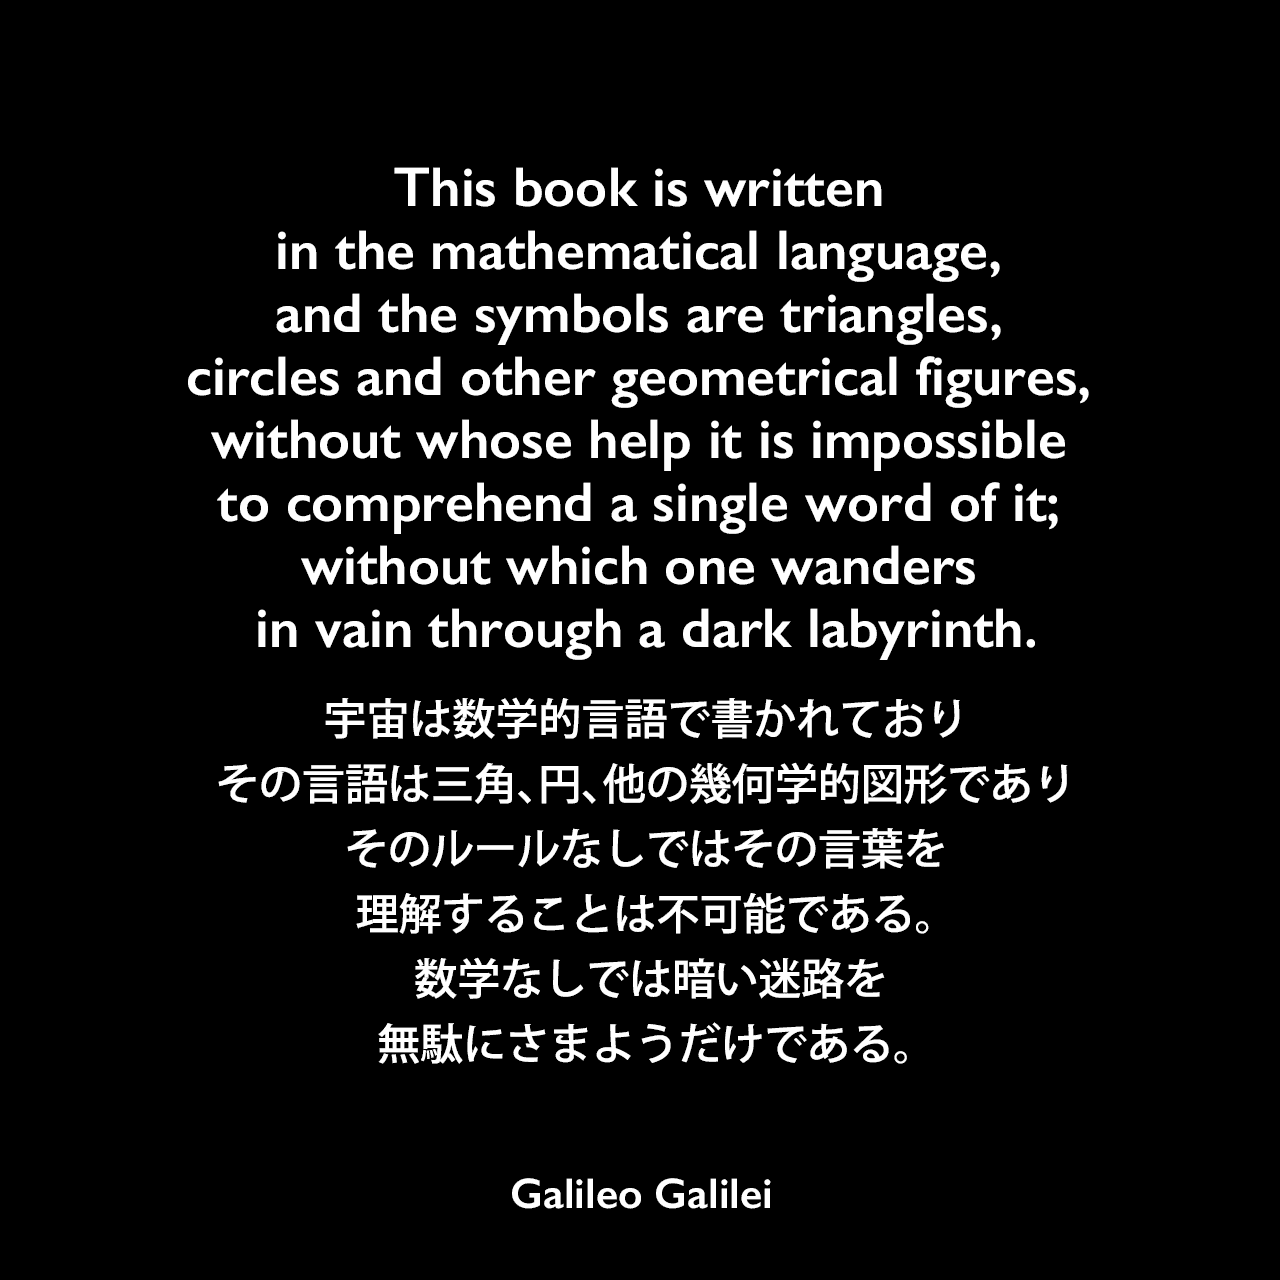 This book is written in the mathematical language, and the symbols are triangles, circles and other geometrical figures, without whose help it is impossible to comprehend a single word of it; without which one wanders in vain through a dark labyrinth.宇宙は数学的言語で書かれており、その言語は三角、円、他の幾何学的図形であり、そのルールなしではその言葉を理解することは不可能である。 数学なしでは暗い迷路を無駄にさまようだけである。- ガリレオ・ガリレイの本「イル・サジアトーレ」よりGalileo Galilei